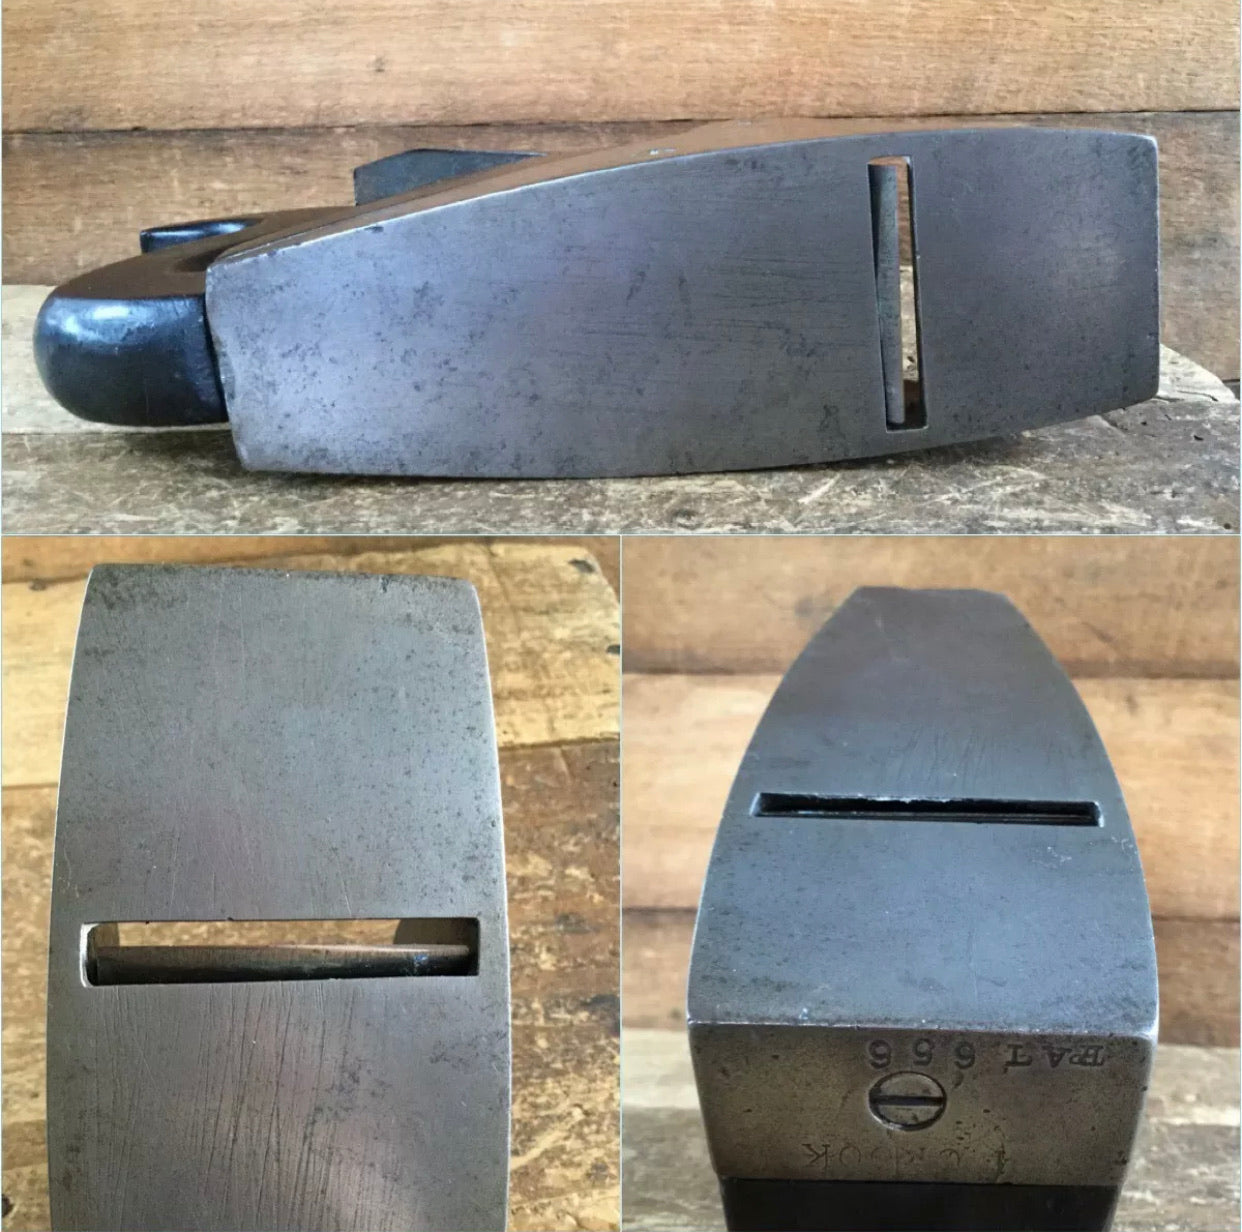 RARE Antique PRESTON PATENTED Infill Smoothing PLANE